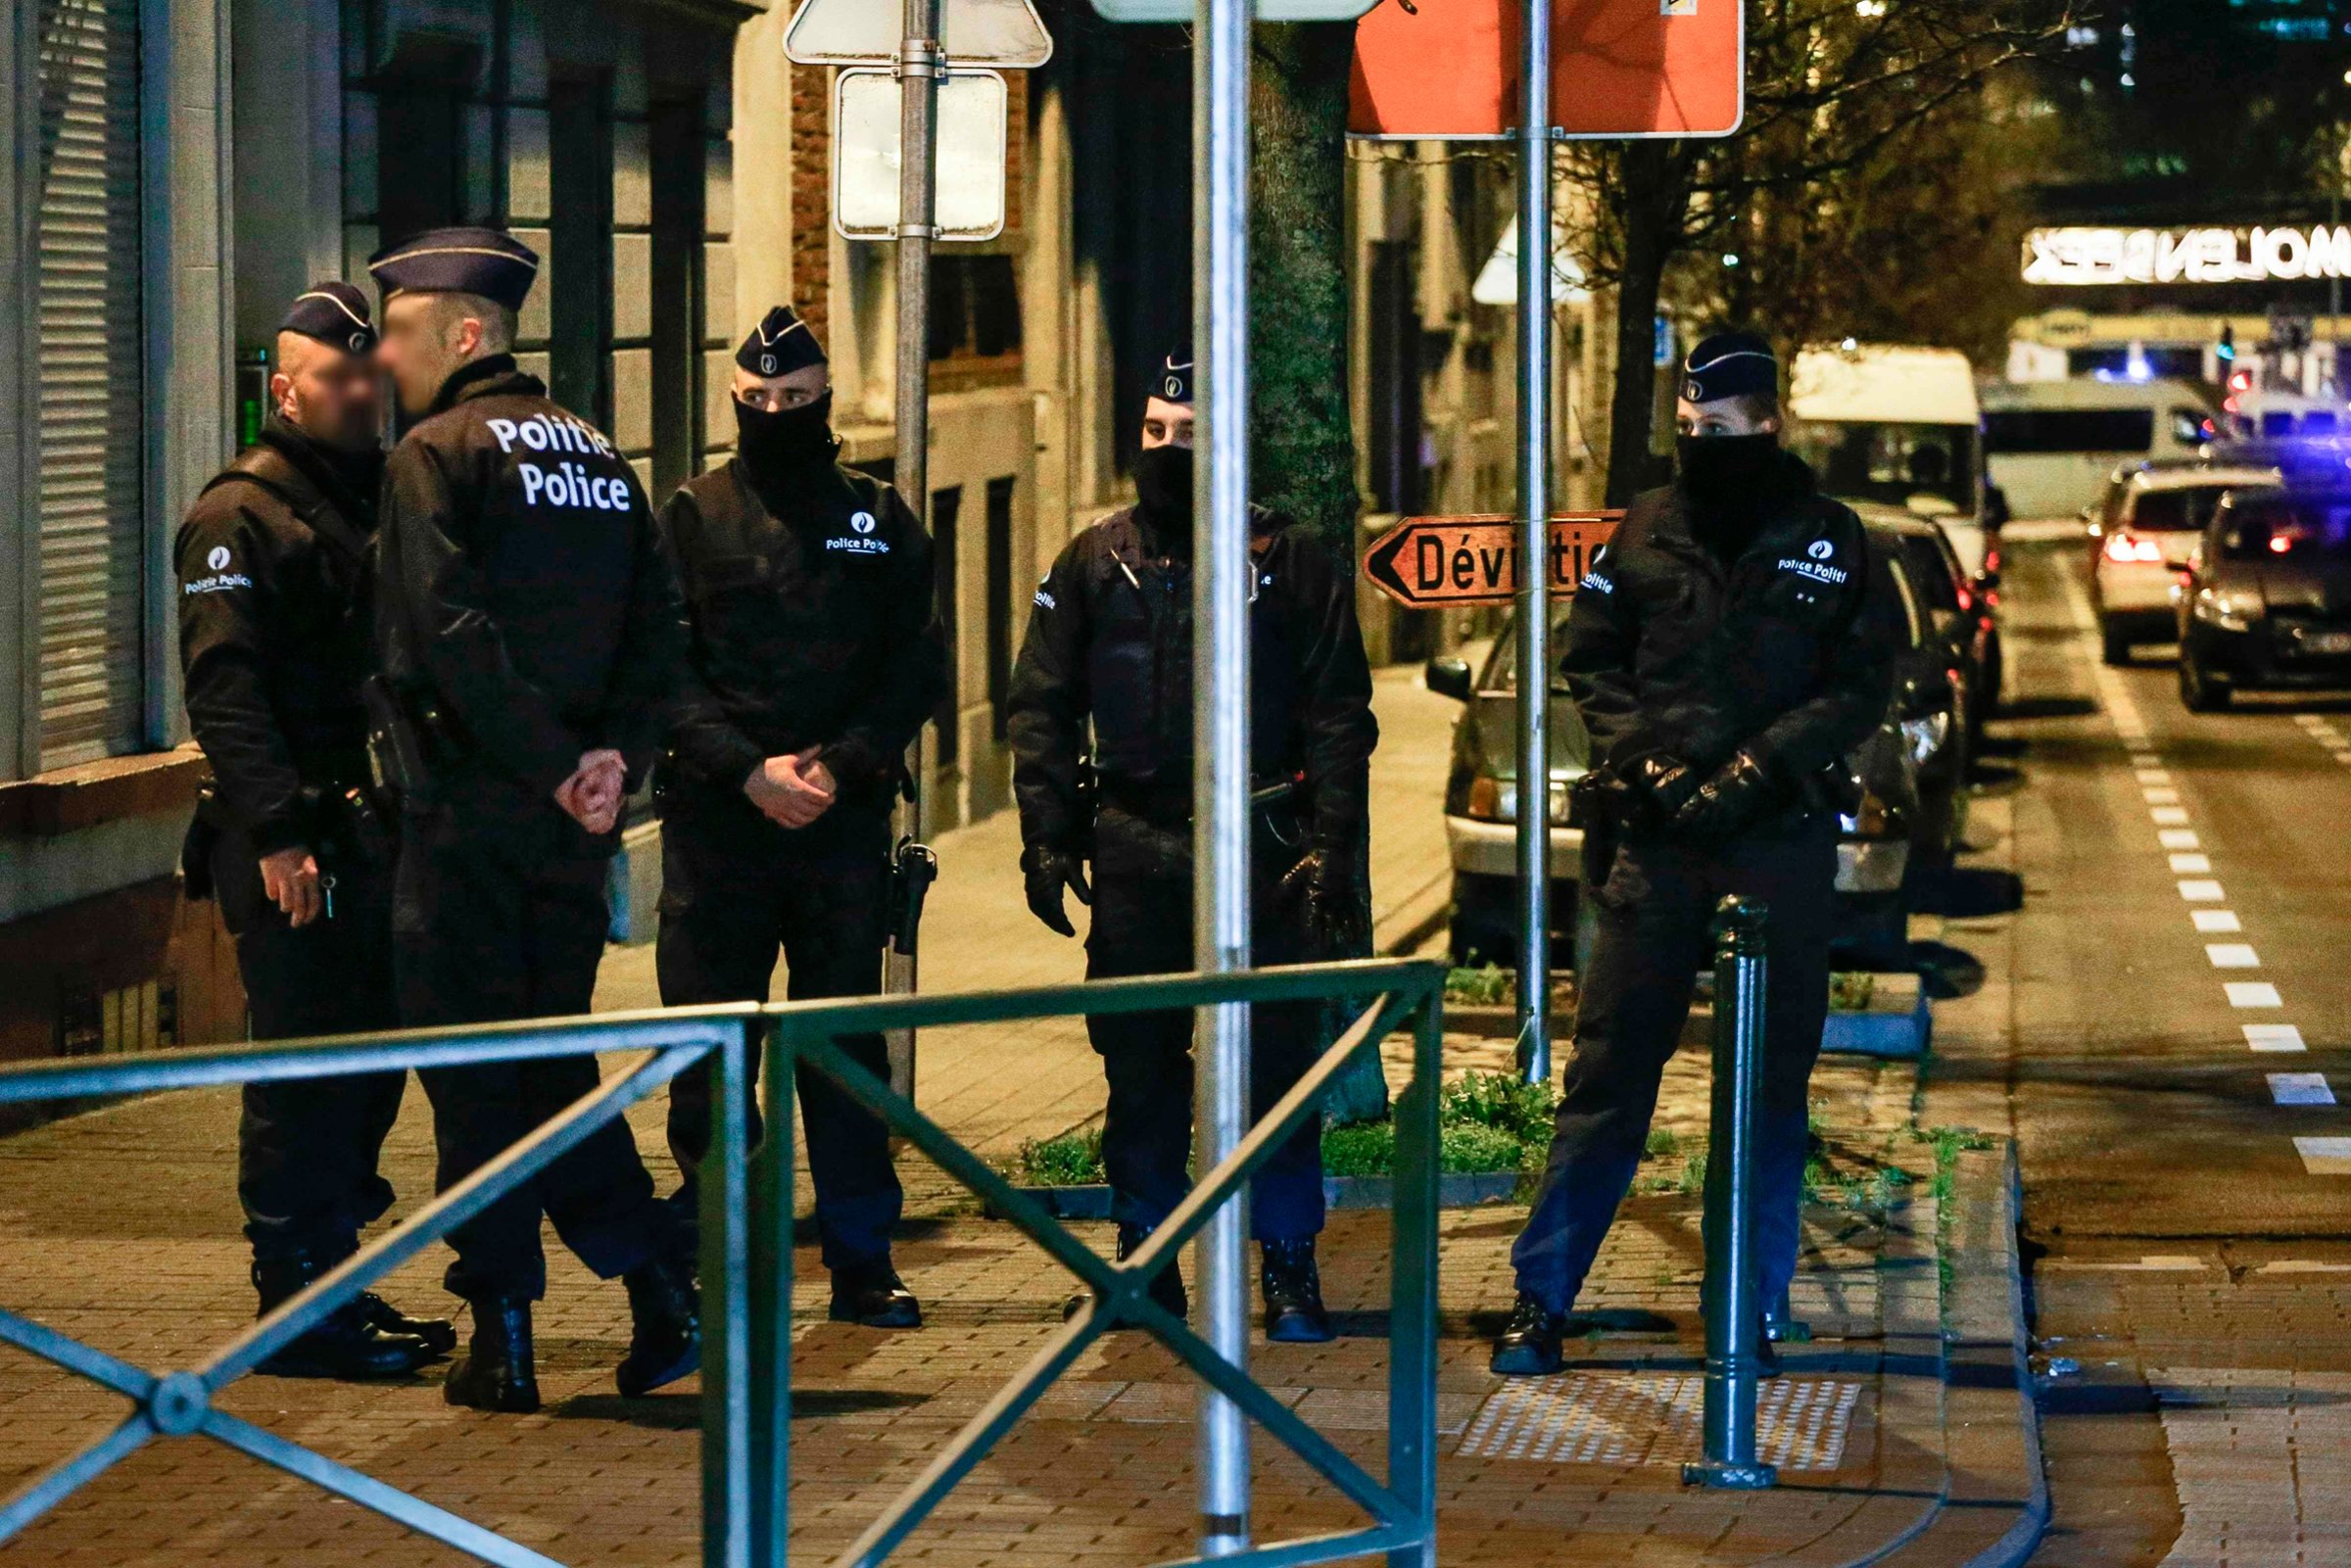 Belgian police conduct searches linked to the Paris attacks in Molenbeek, Brussels, on Dec. 30